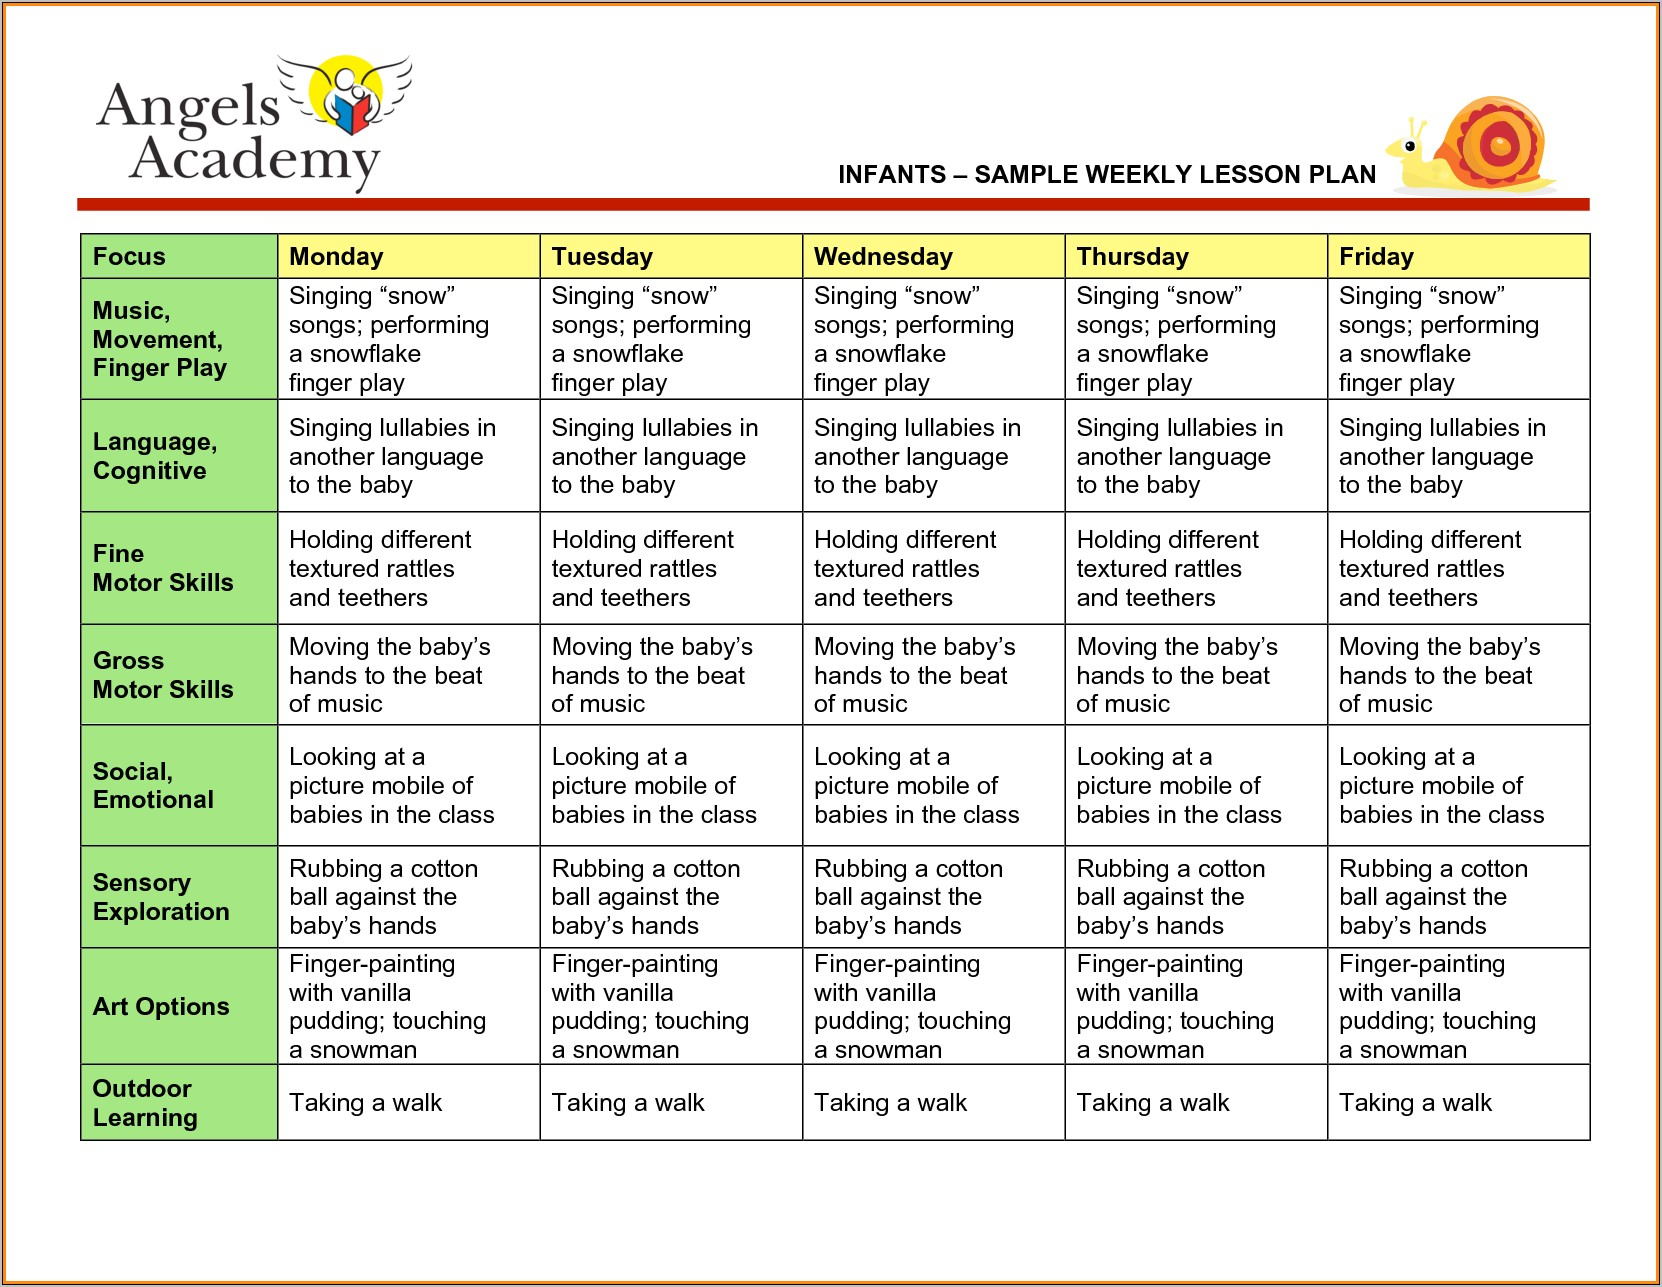 Weekly Lesson Plan Template Pdf